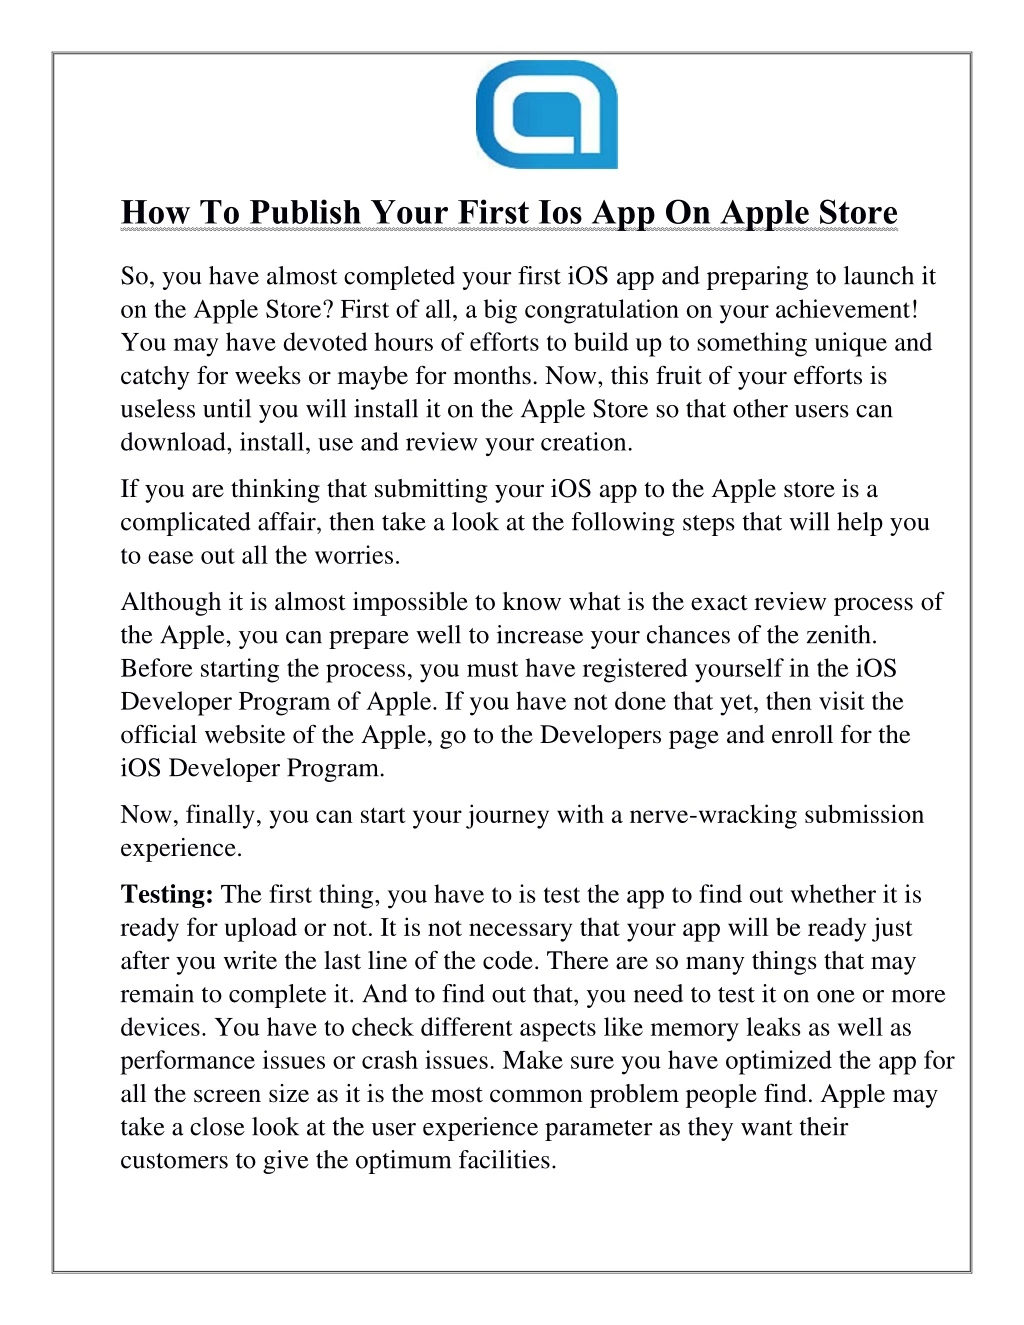 how to publish your first ios app on apple store